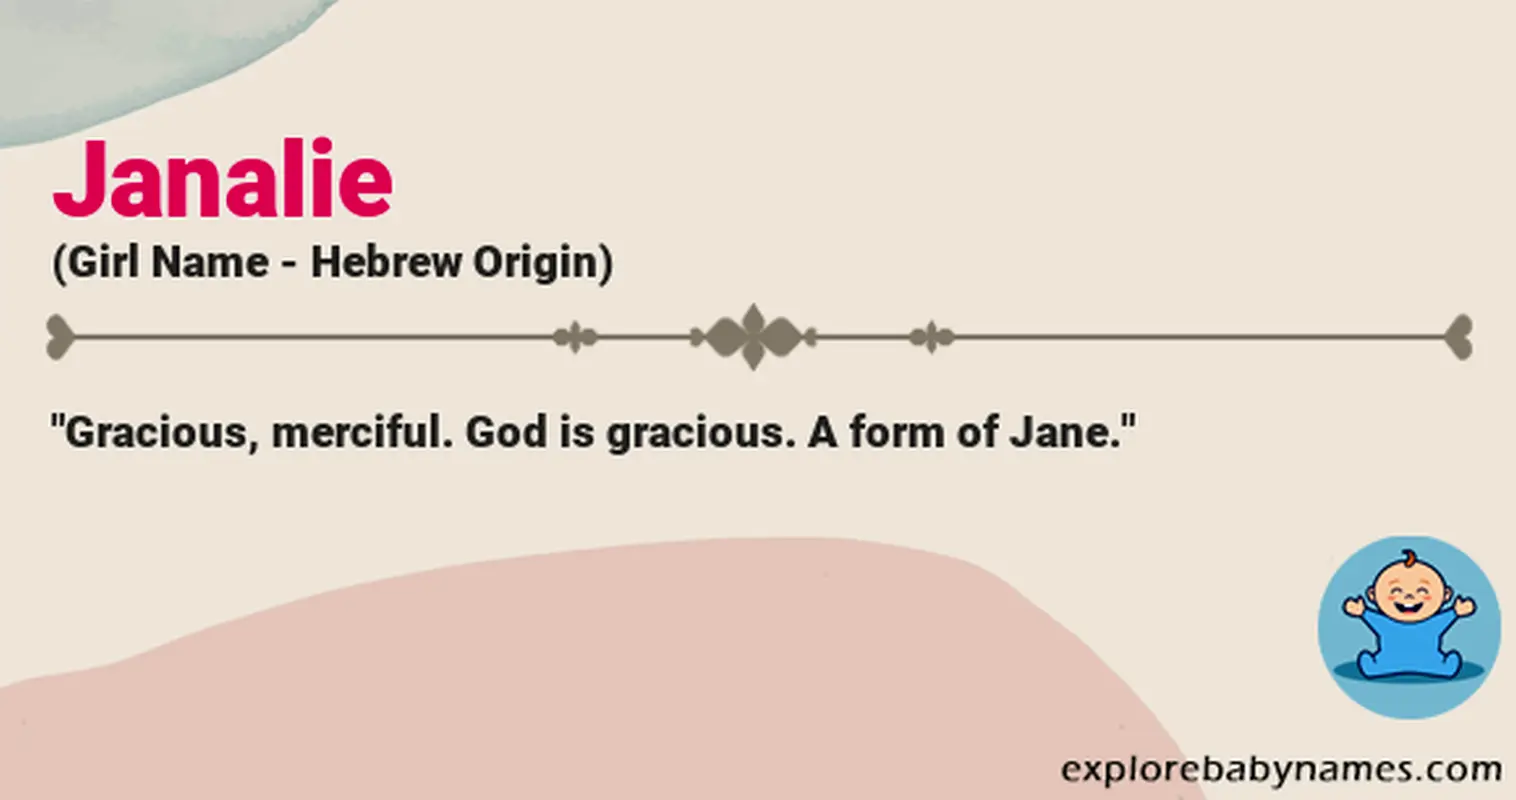 Meaning of Janalie